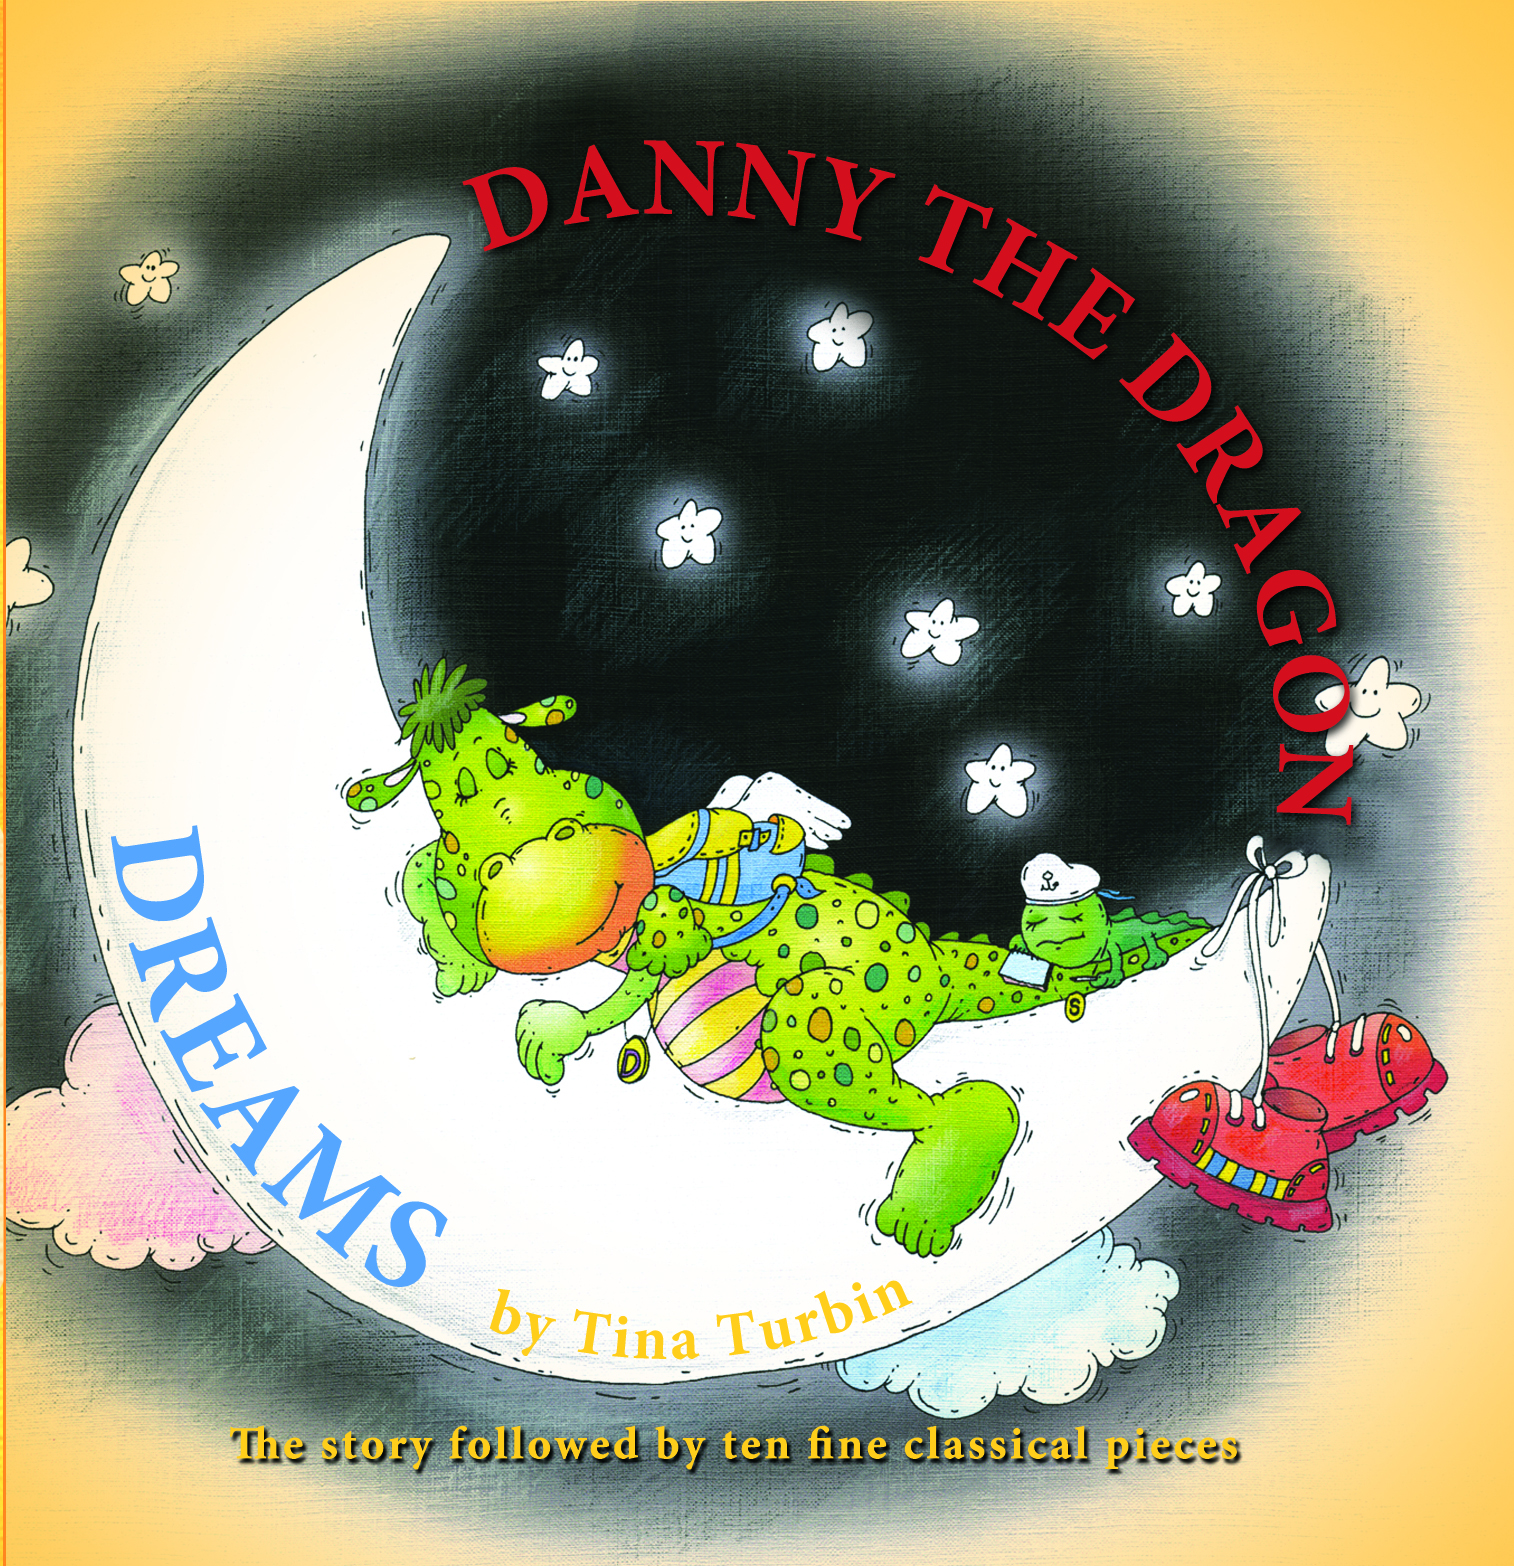 Children's Book Review: Danny the Dragon "Meets Jimmy" and Danny the Dragon Dreams CD